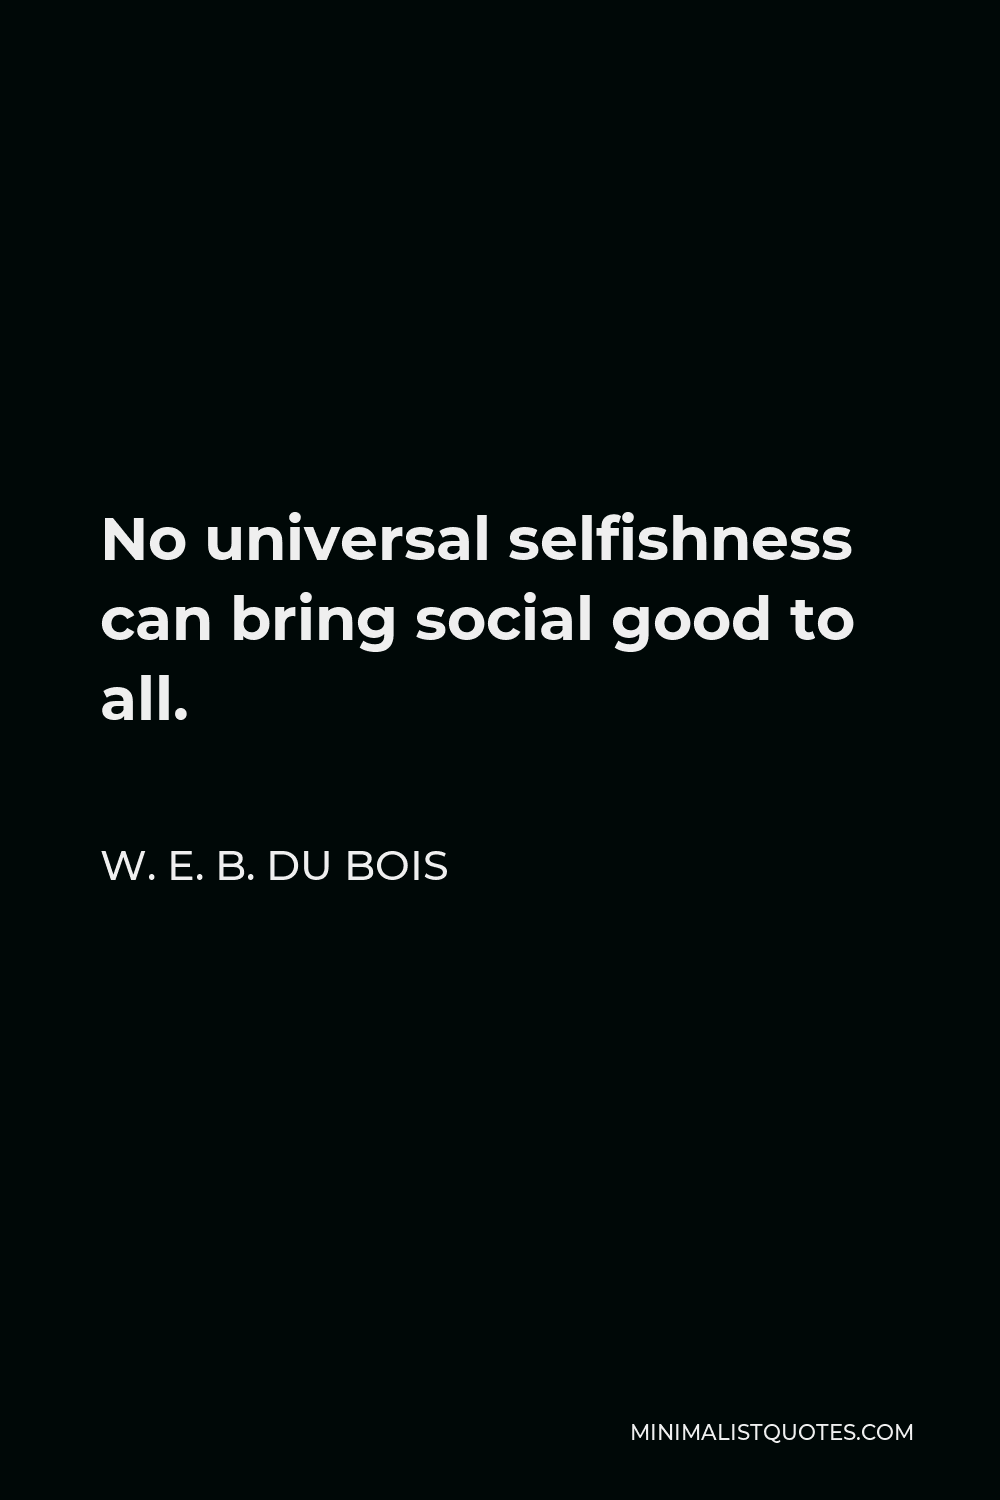 W. E. B. Du Bois Quote - No universal selfishness can bring social good to all.